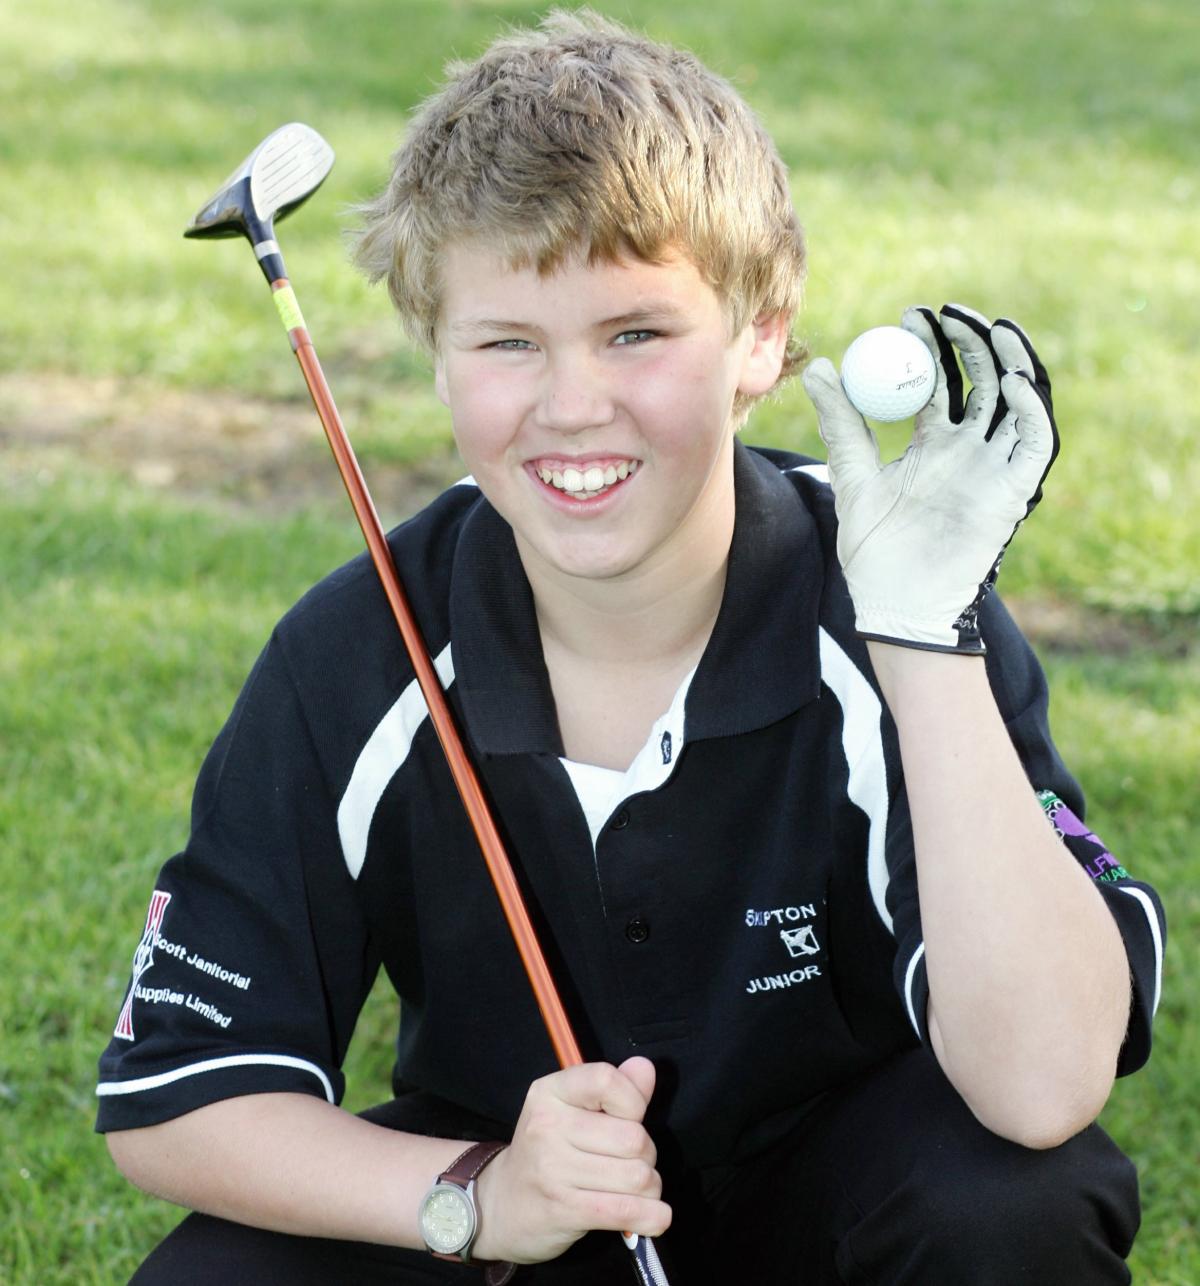 Robert Nesbitt, who is just 11 years of age, has become the youngest player ever at Skipton Golf Club to score a hole-in-one in a bona fide club competition. 